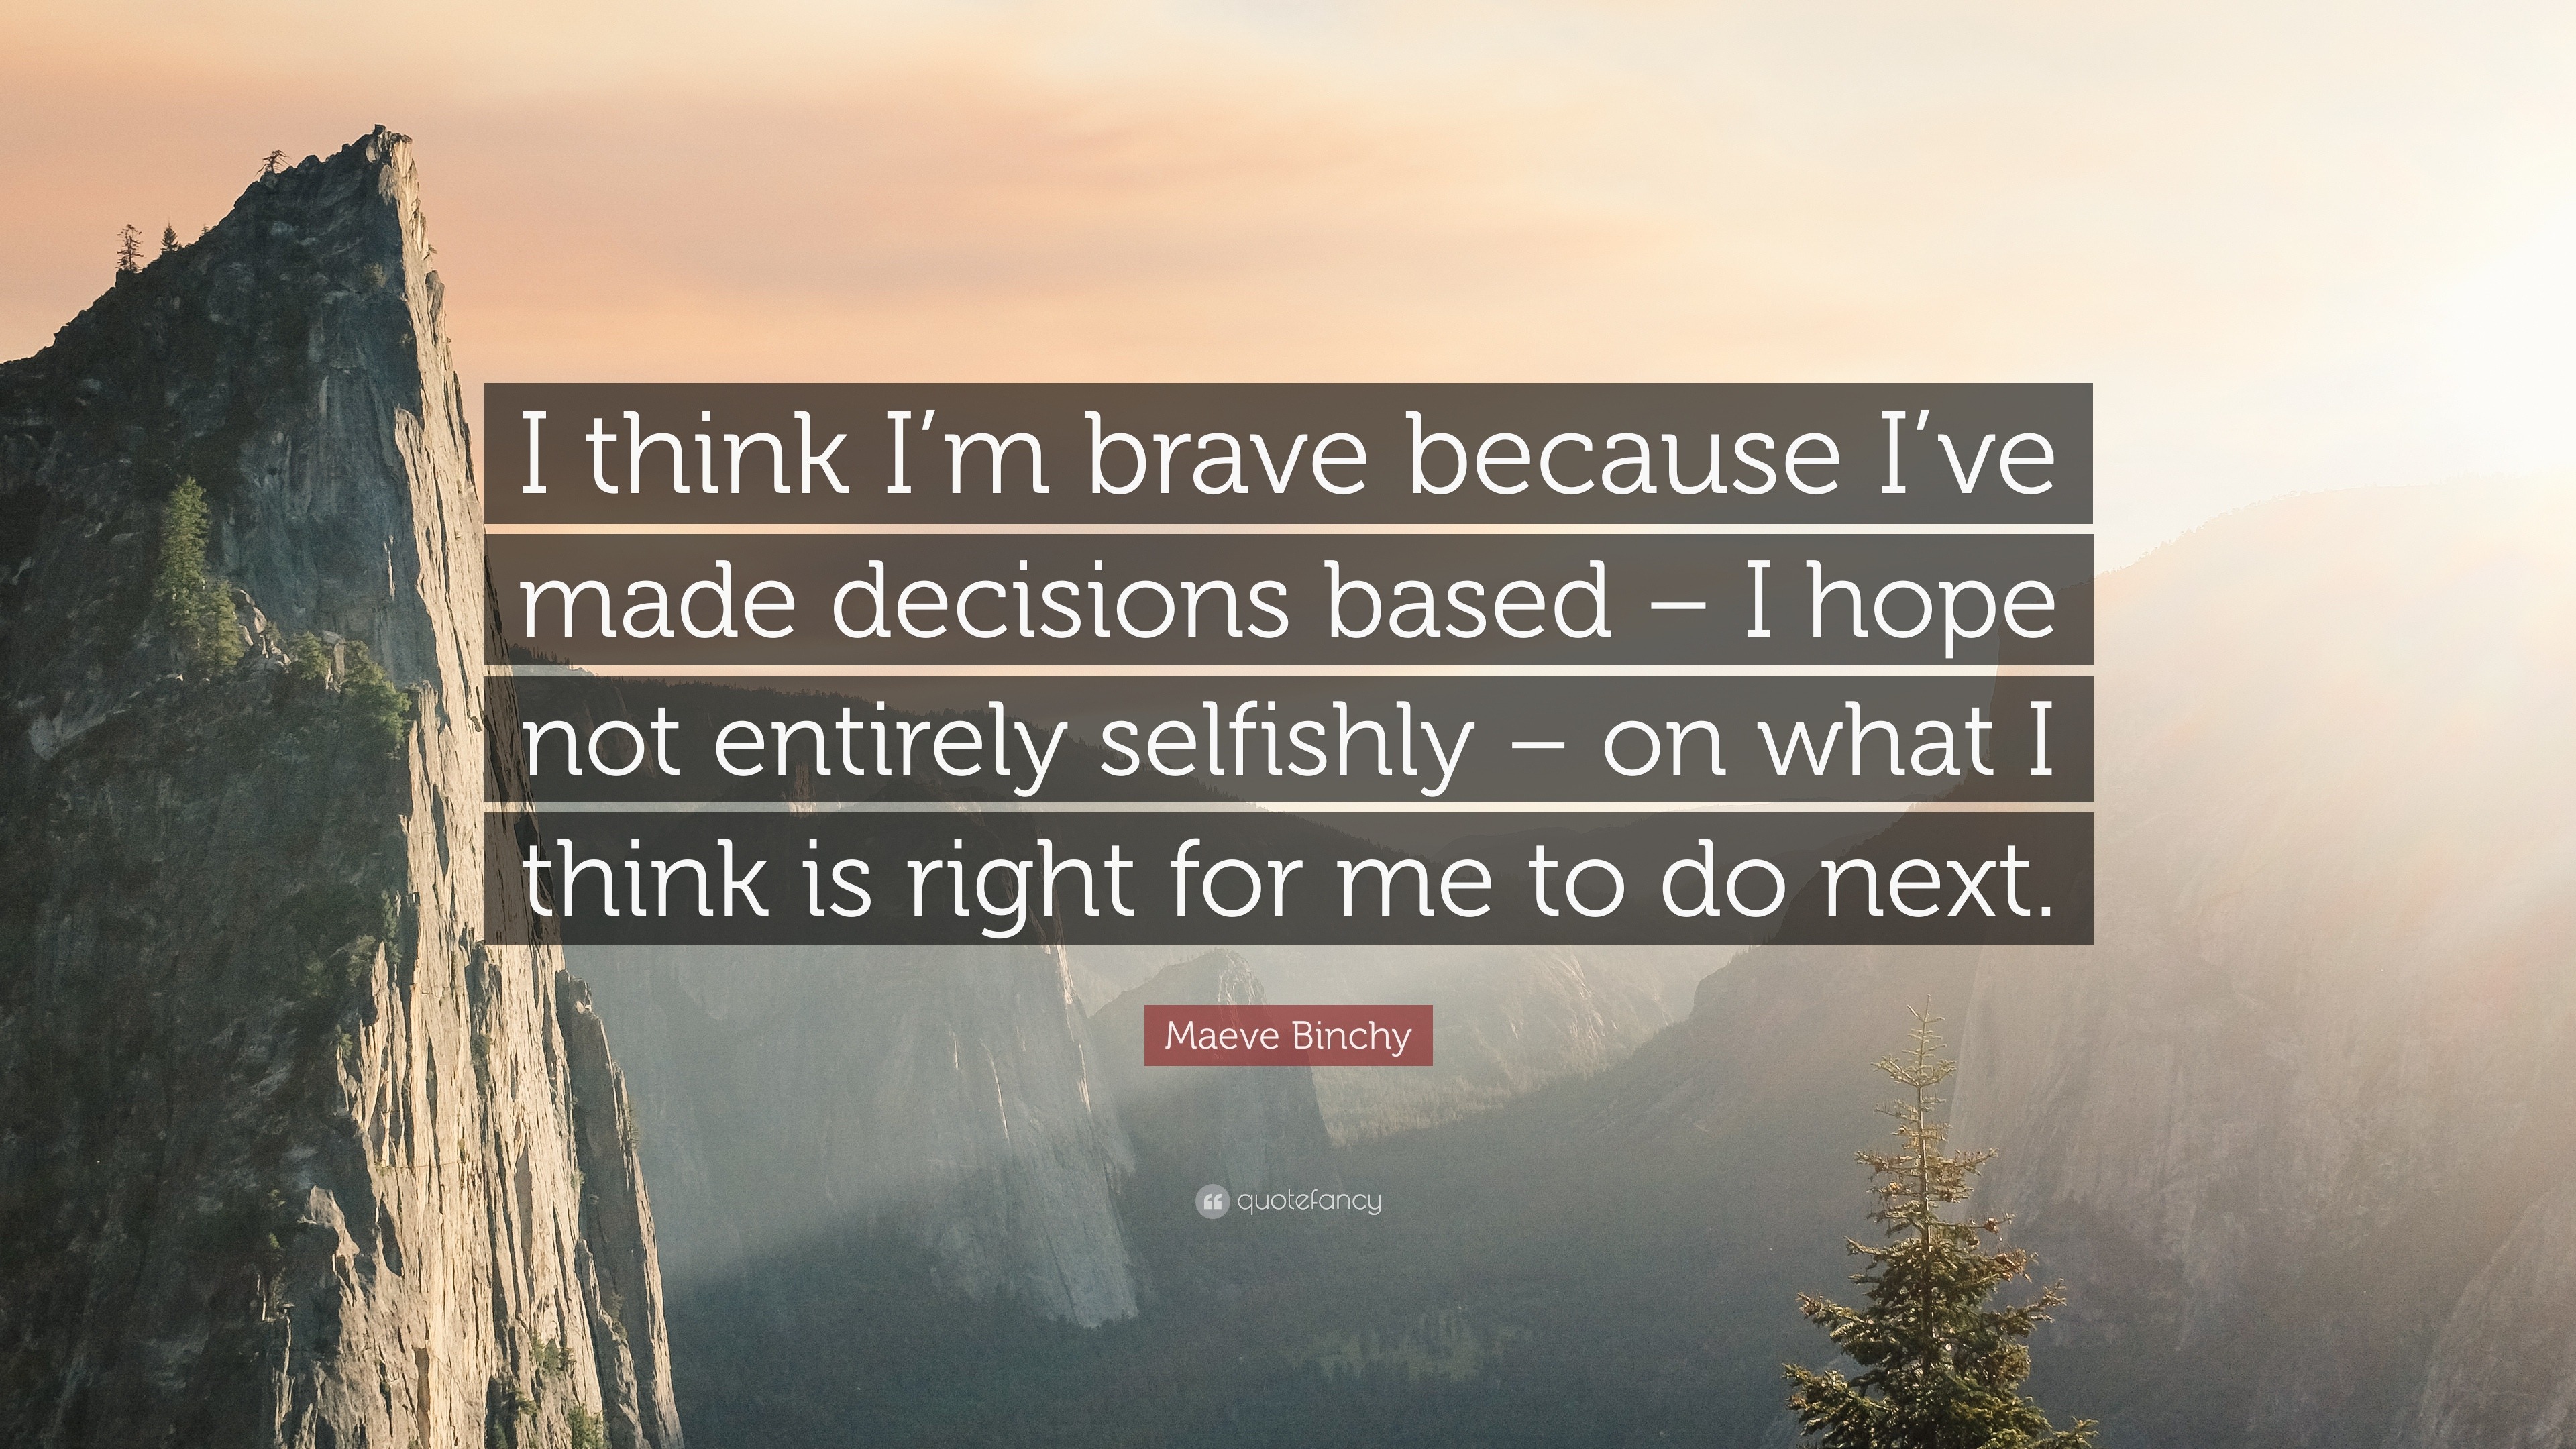 Maeve Binchy Quote: “I think I'm brave because I've made decisions